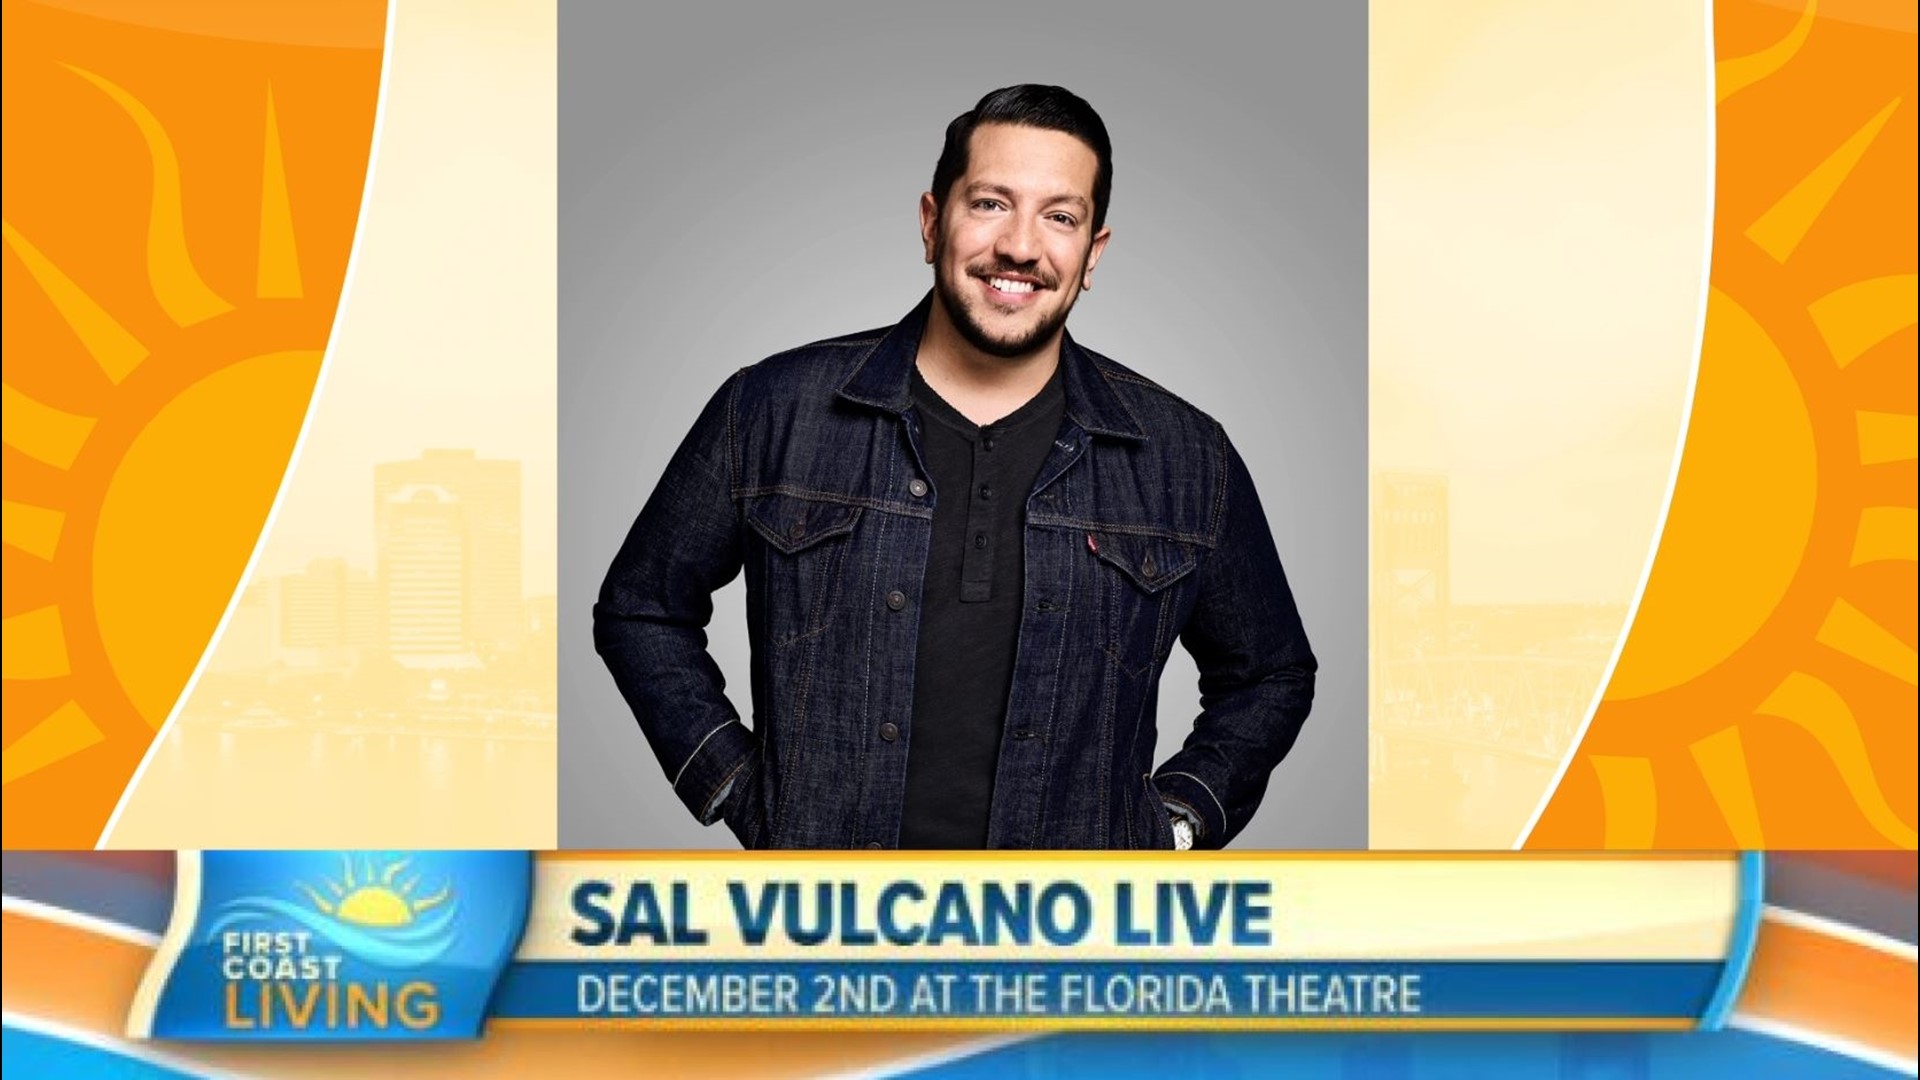 You still have time to purchase your tickets to see him tonight at The Florida Theatre.